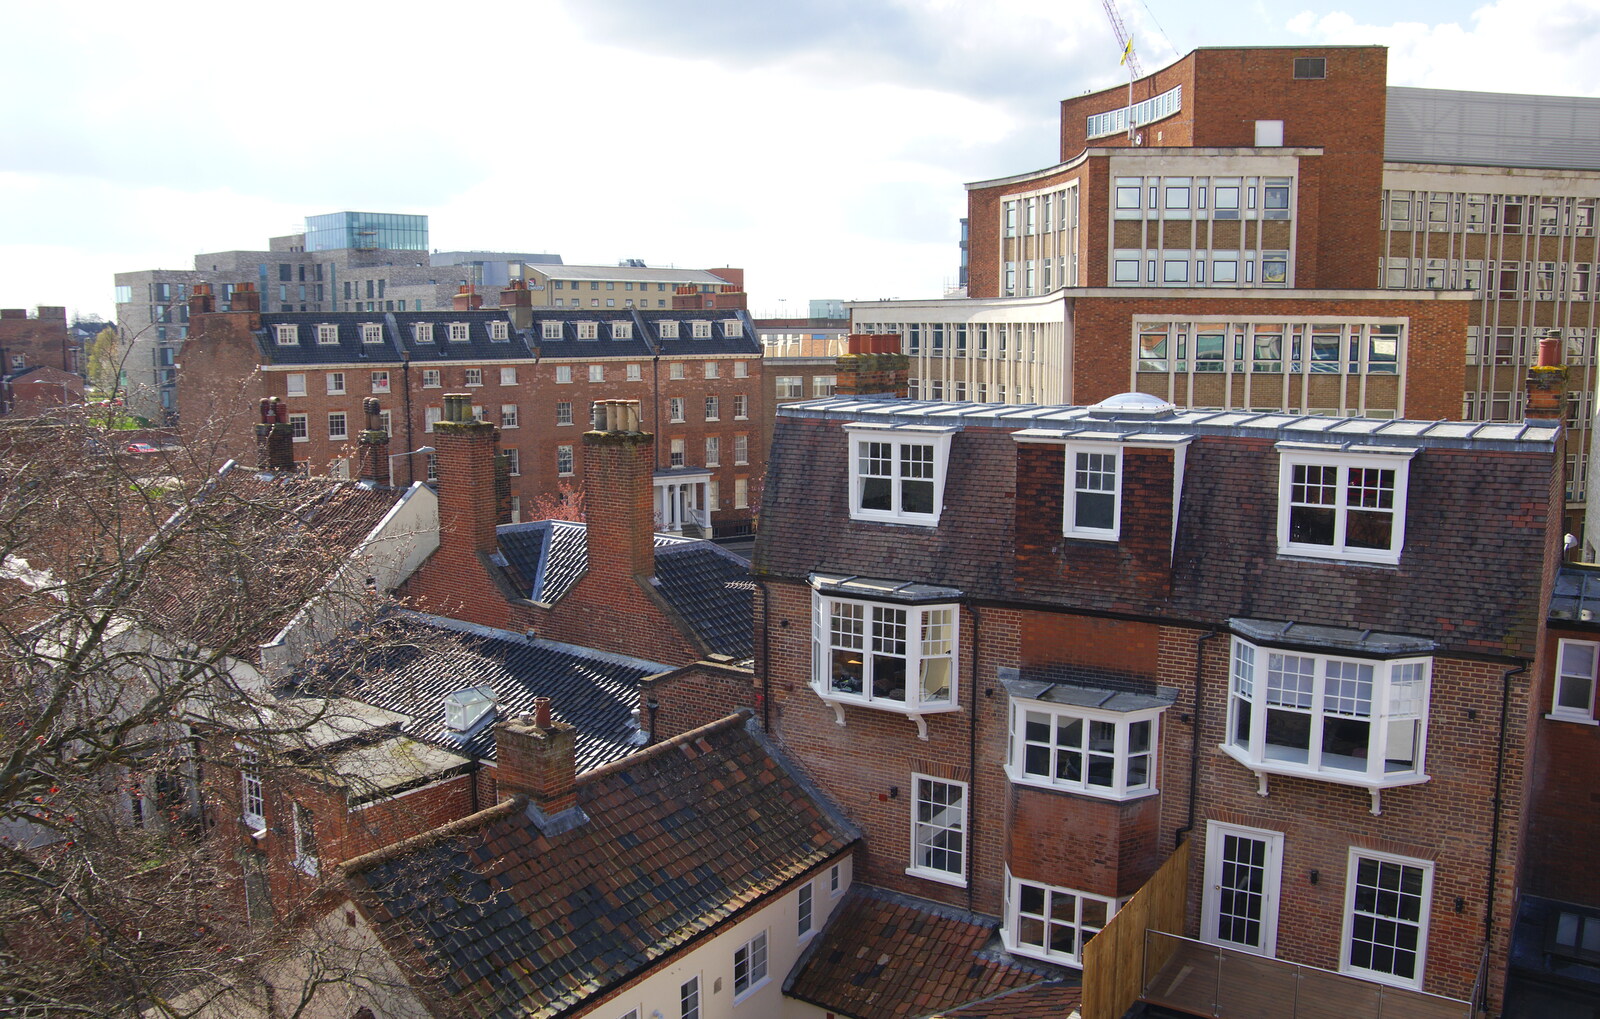 Up above the streets and houses from Singing in John Lewis, Norwich, Norfolk - 13th April 2019